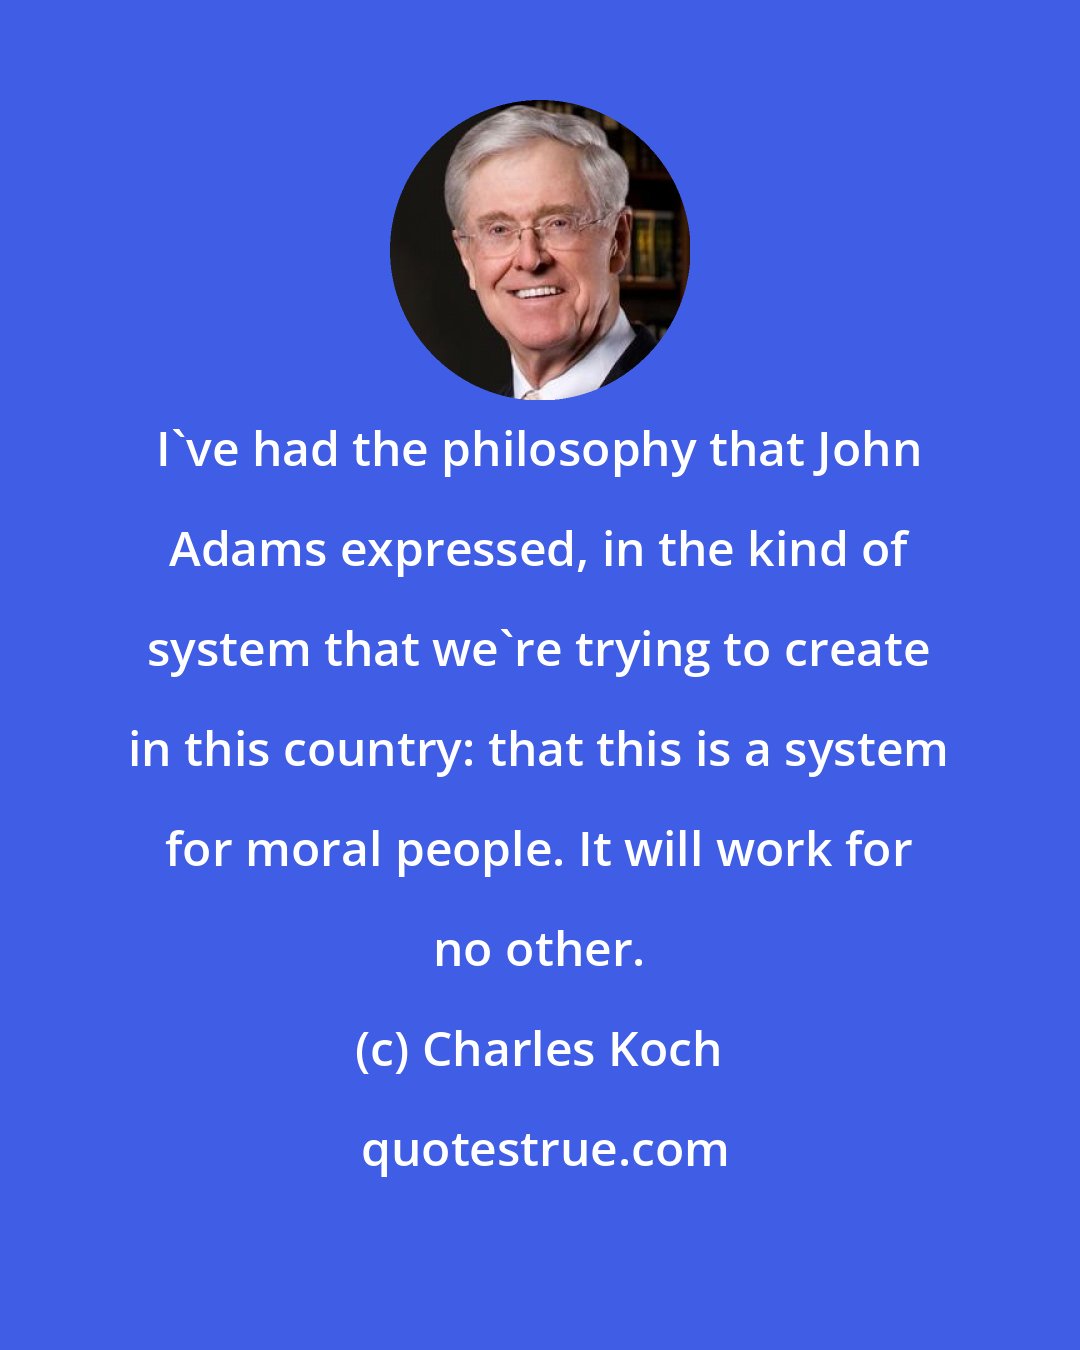 Charles Koch: I've had the philosophy that John Adams expressed, in the kind of system that we're trying to create in this country: that this is a system for moral people. It will work for no other.